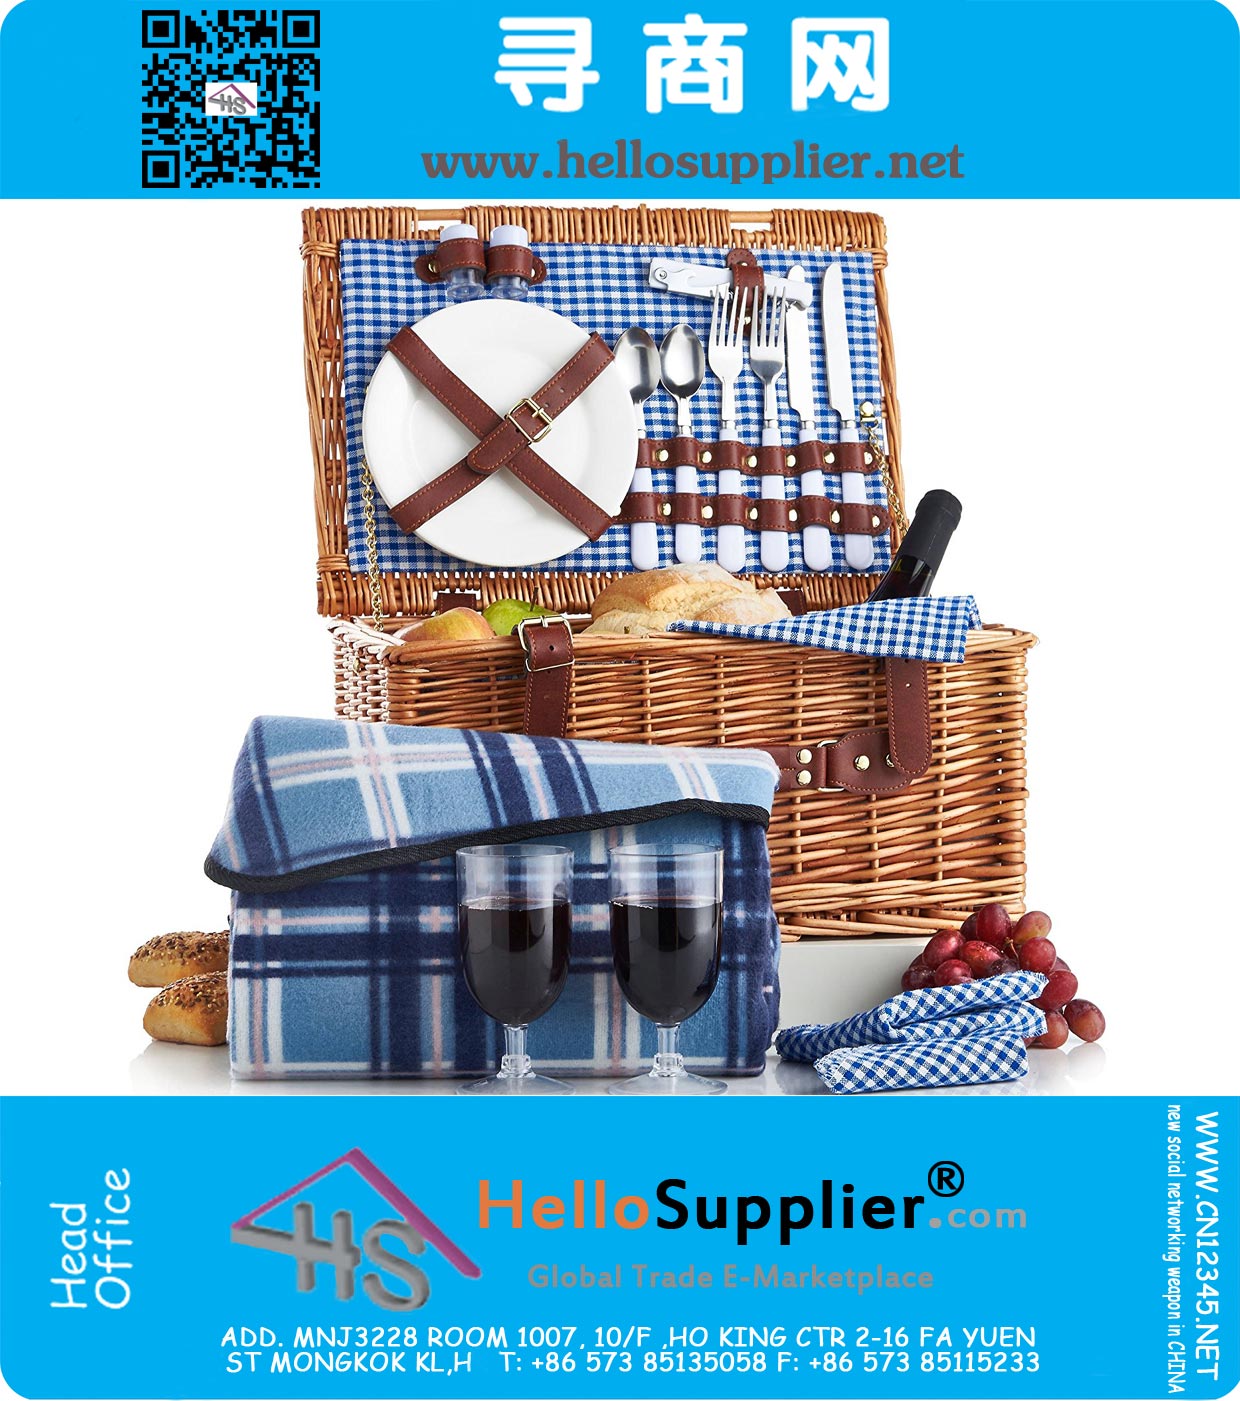 Deluxe 2 Person Traditional Wicker Picnic Basket Hamper with Cutlery, Plates, Glasses, Tableware And Fleece Blanket